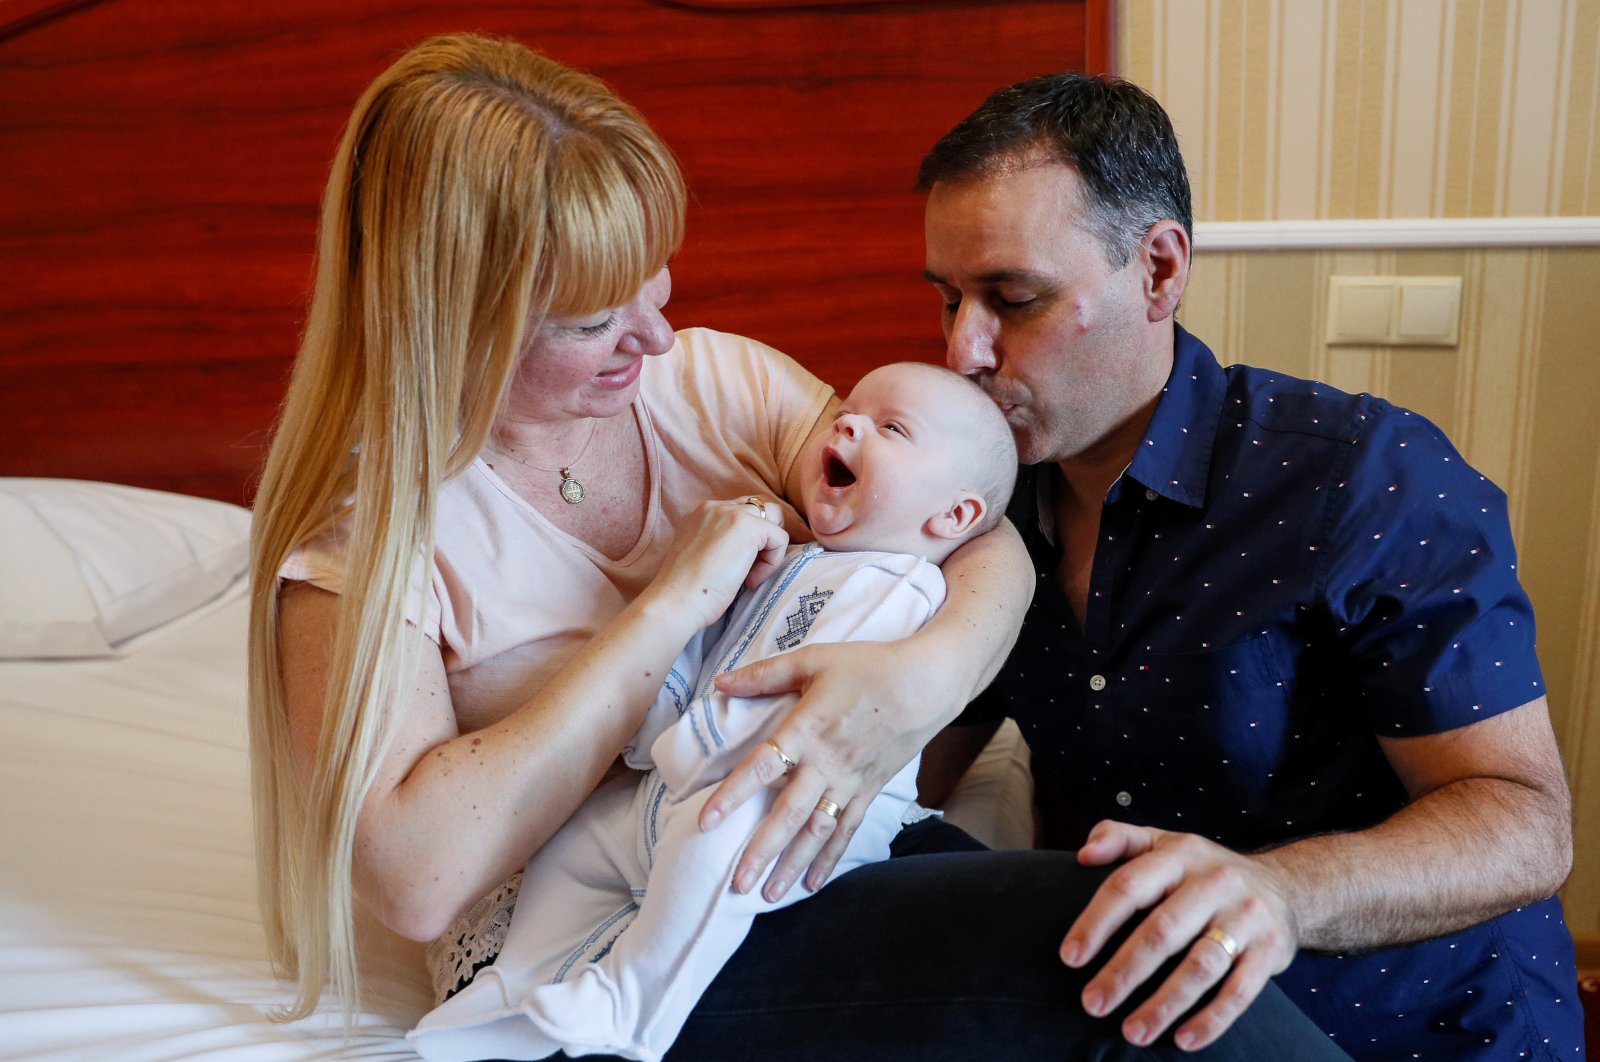 Jose Perez and Flavia Lavorino from Buenos Aires react during their first meeting with their son Manuel, who was born to a surrogate mother in a Ukrainian BioTexCom clinic in Kyiv, Ukraine, June 10, 2020. (Reuters Photo)